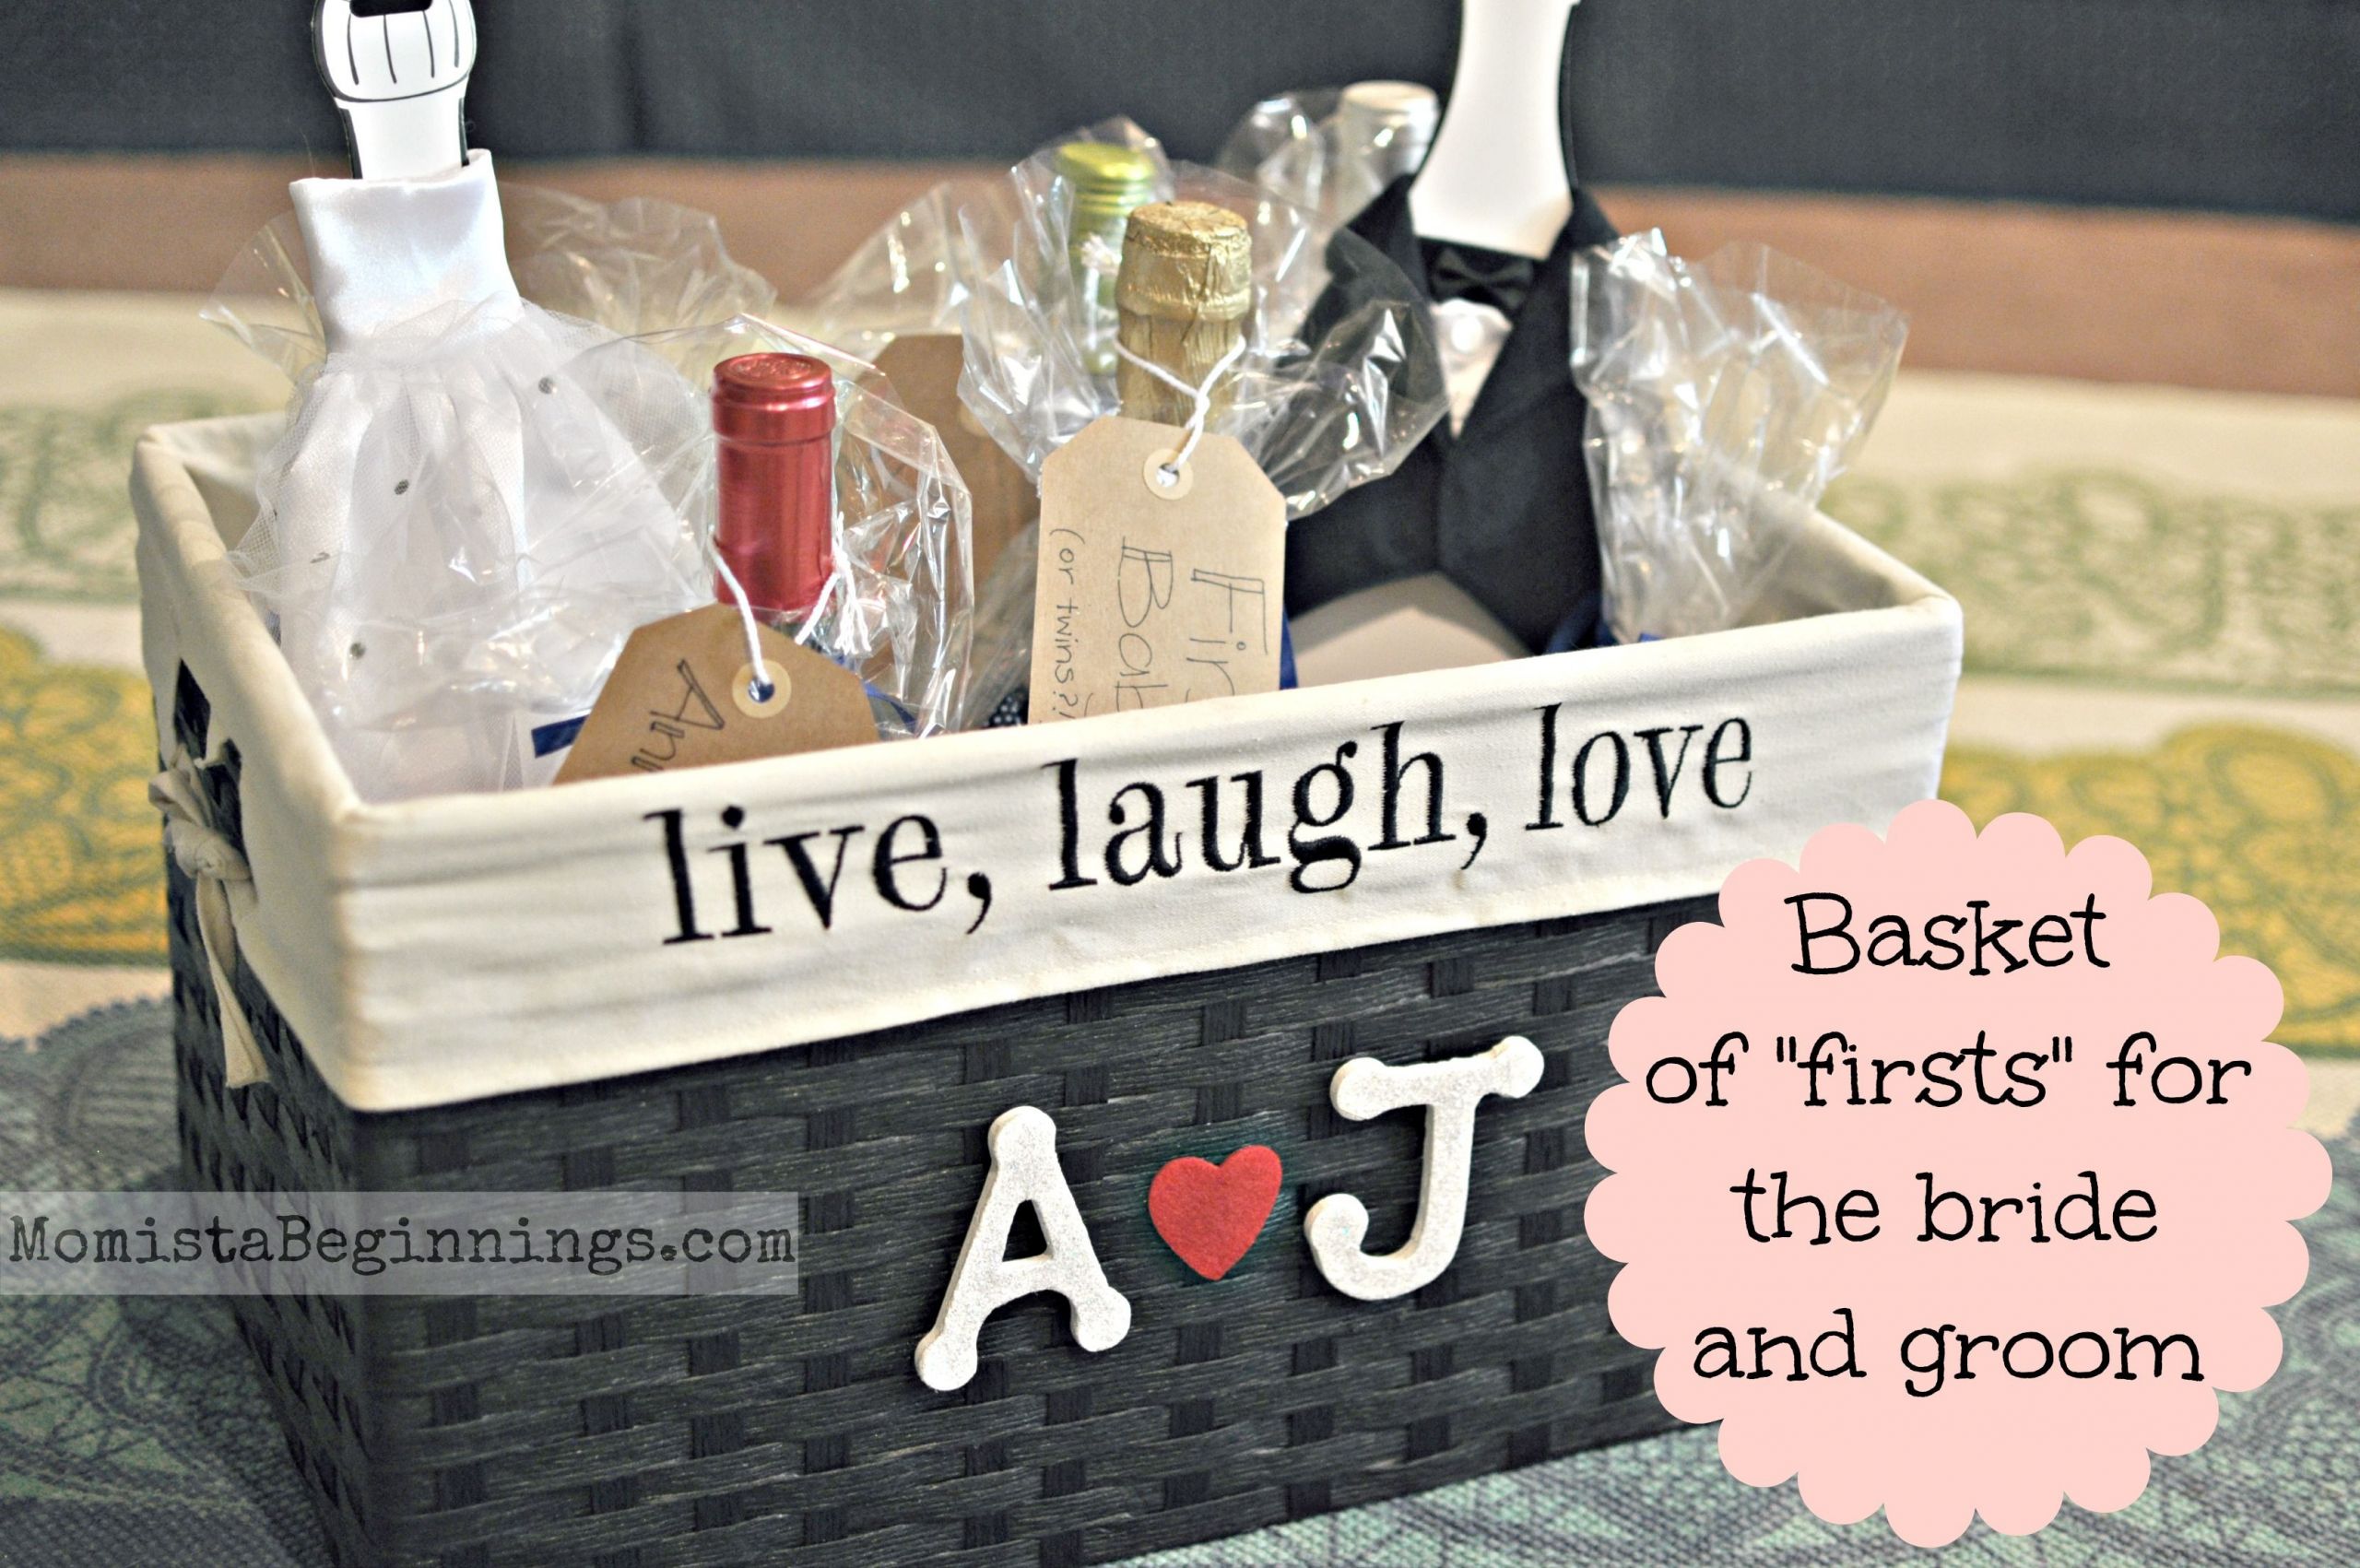 Homemade Wedding Gift Basket Ideas
 Basket of "firsts" bridal shower t This idea includes